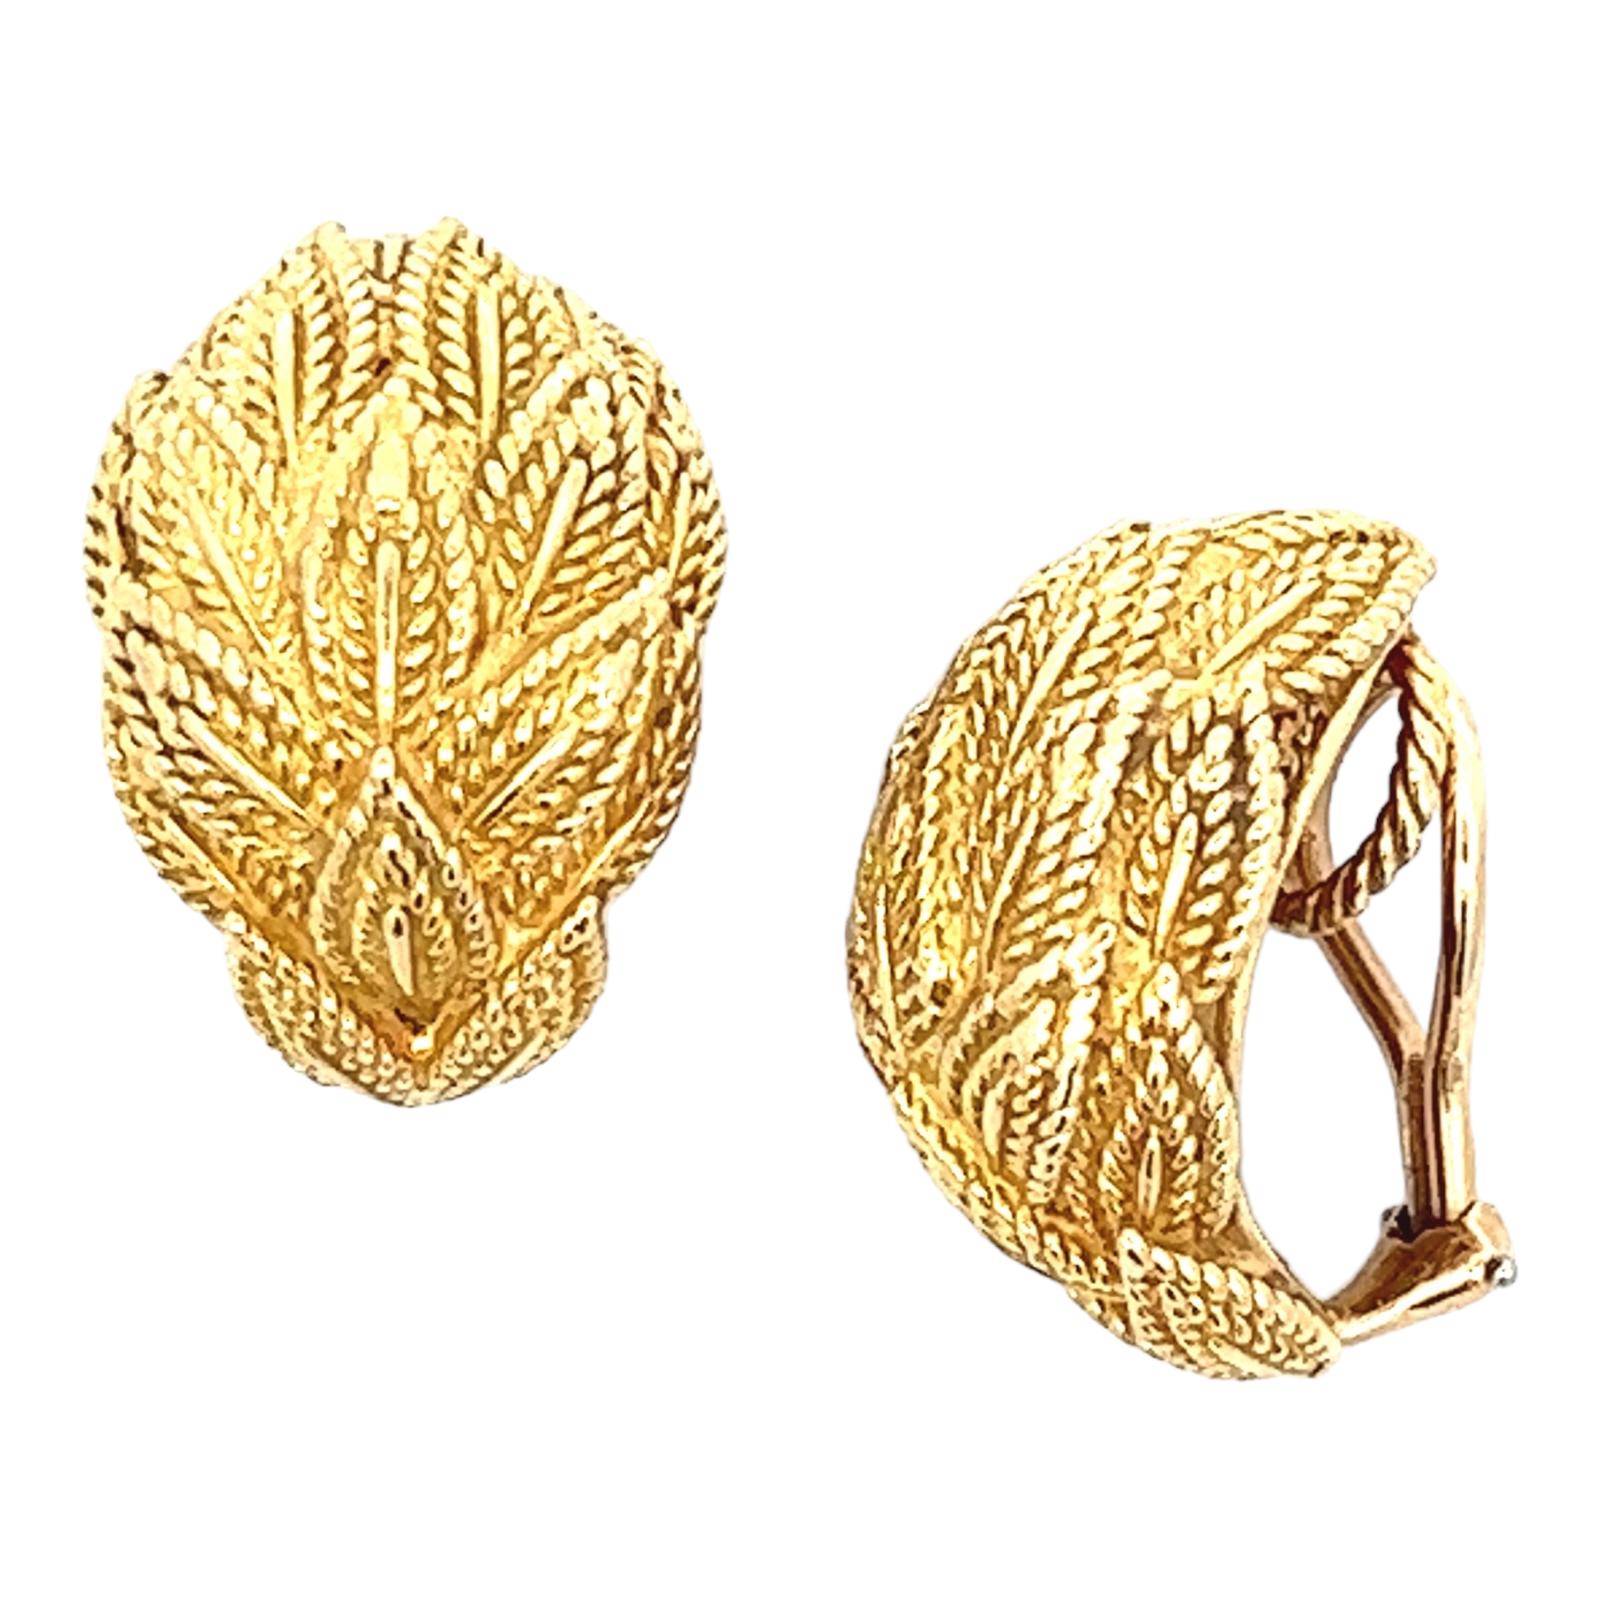 Tiffany & Co. Leaf earrings crafted in 18 karat yellow gold. The earrings feature a textured leaf motif, measure 12 x 22mm, and clip-on leverbacks (posts can be added). Signed Tiffany & Co. 18k. 